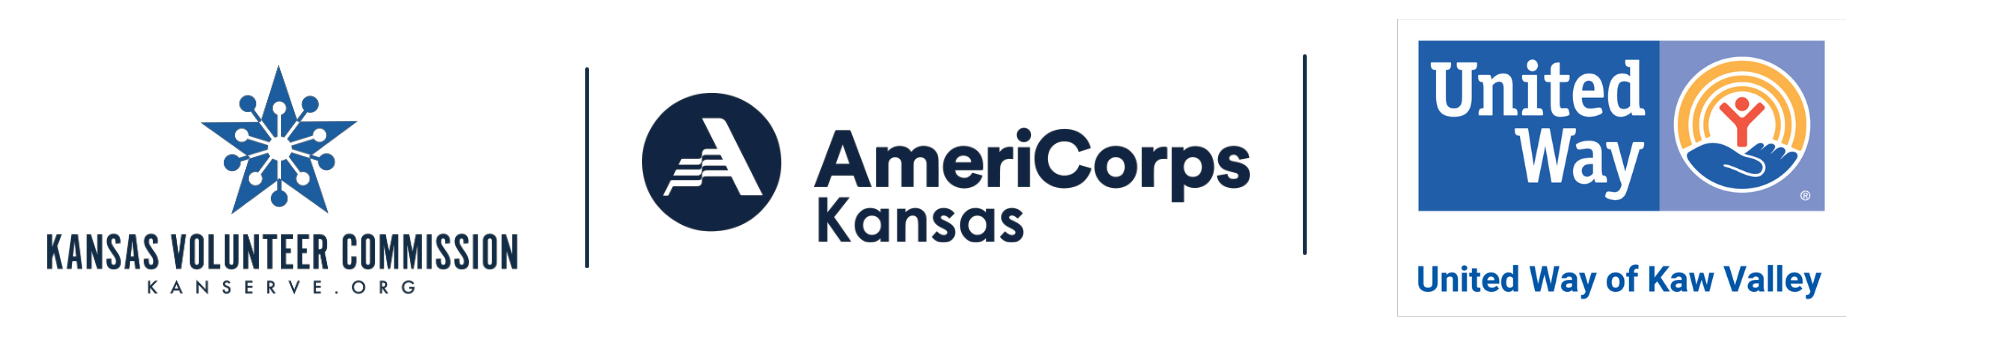 Logos for Kansas Volunteer COmmission, AmeriCorps and United Way of Kaw Valley